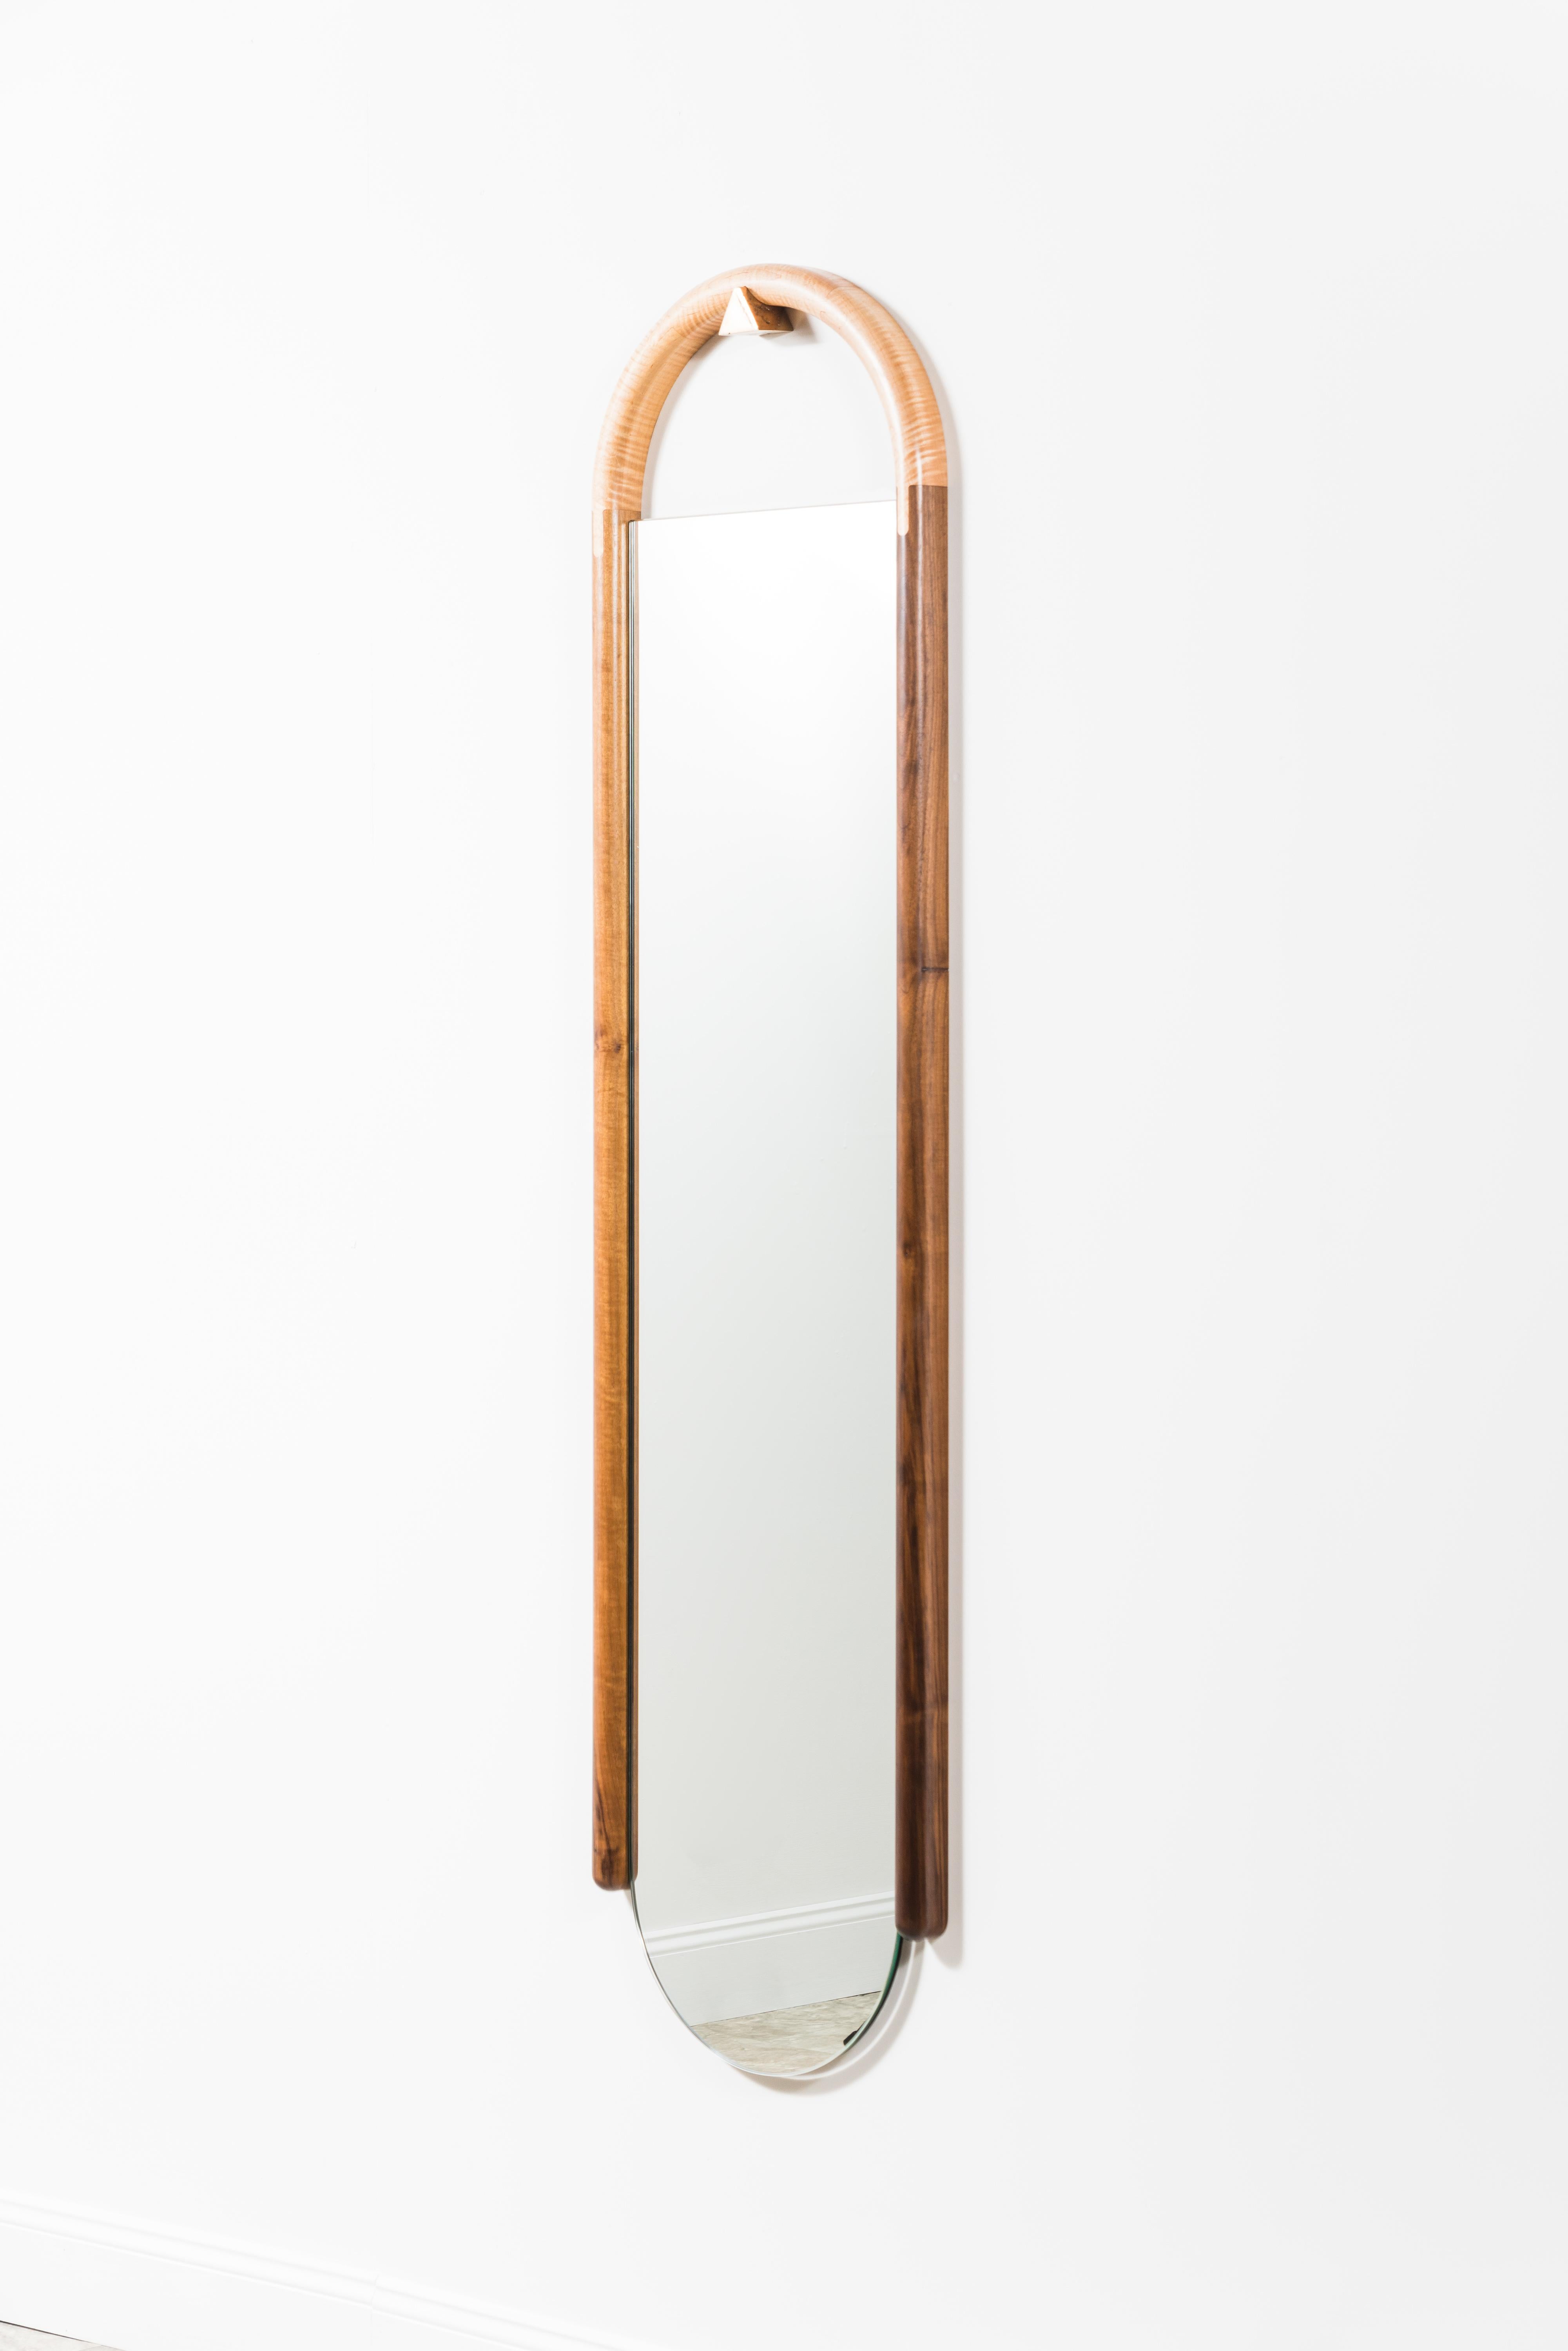 Halo Mirror in Padouk and Curly Maple, Wall Hanging Full Length Mirror 5